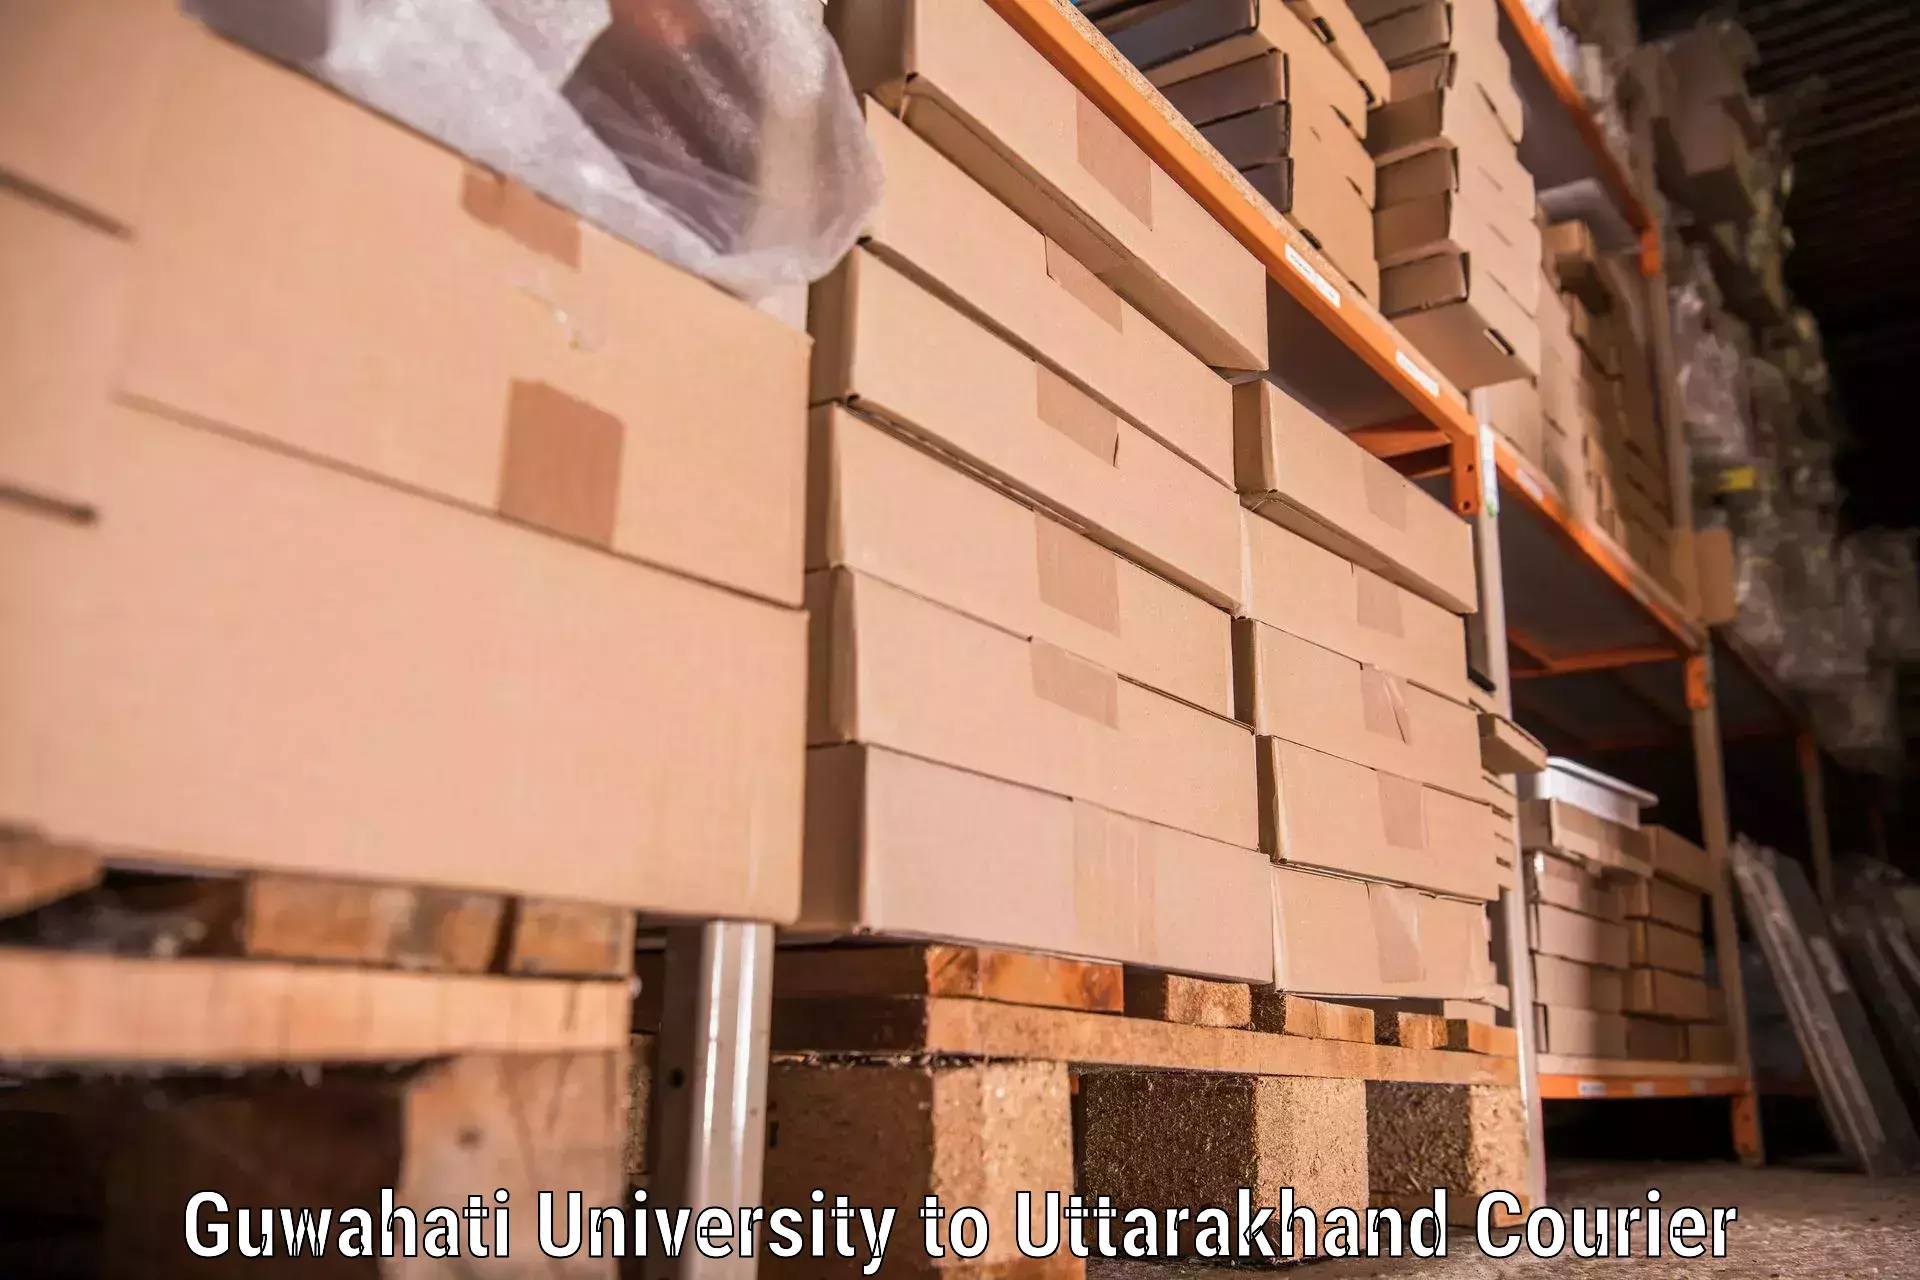 Furniture moving services in Guwahati University to Almora